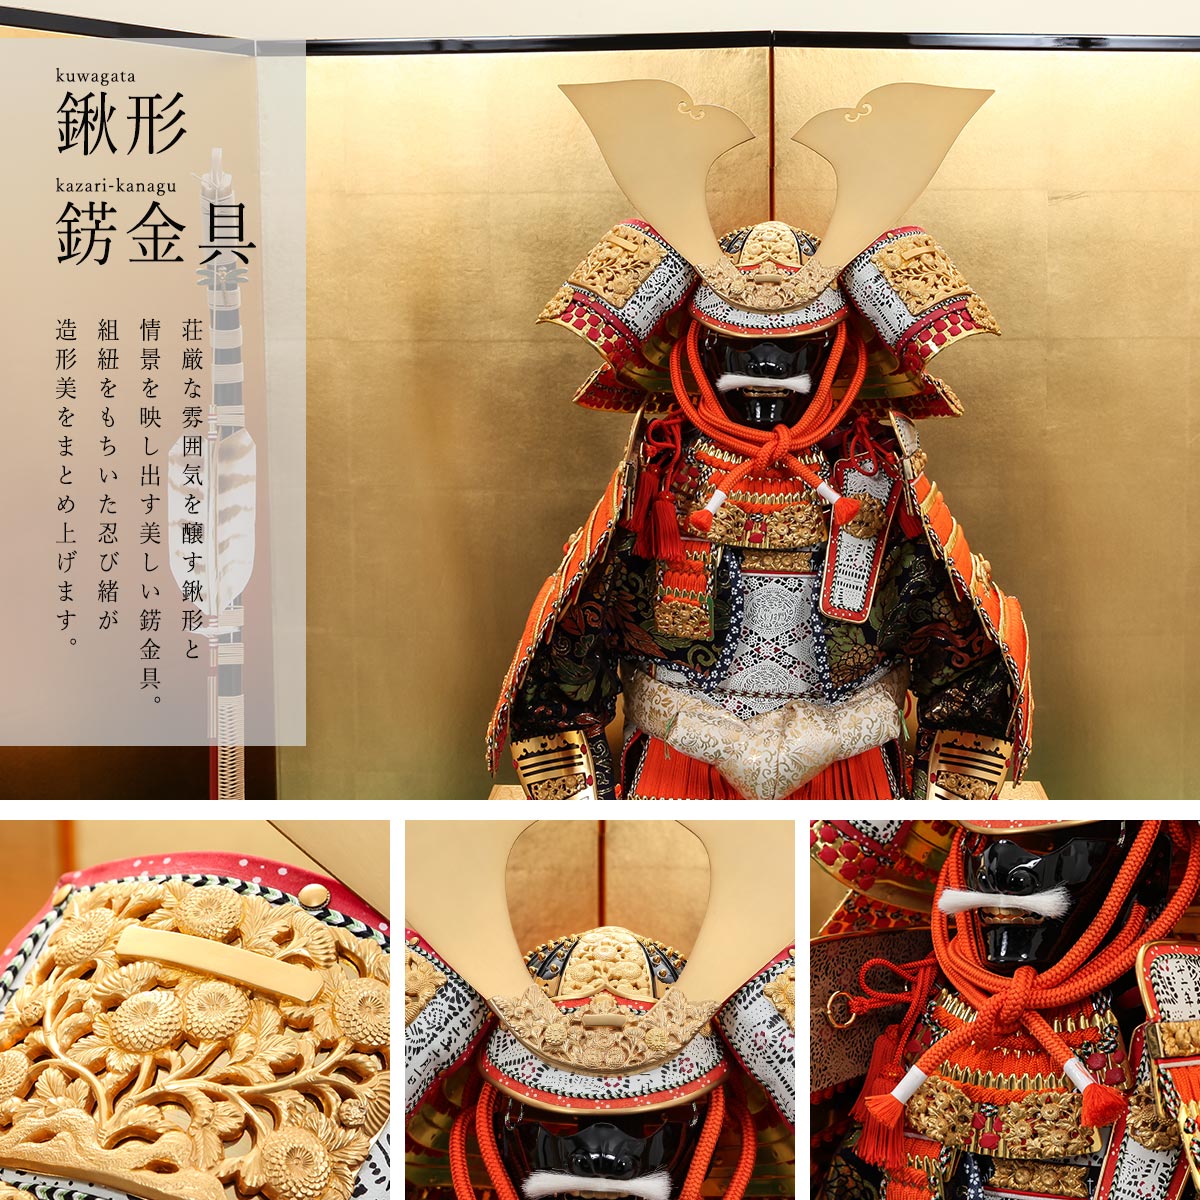 . rice field . Kiyoshi confidence work Boys' May Festival dolls armour ornament 20 number total reverse side book@ gold .[. hospitality discount price ]